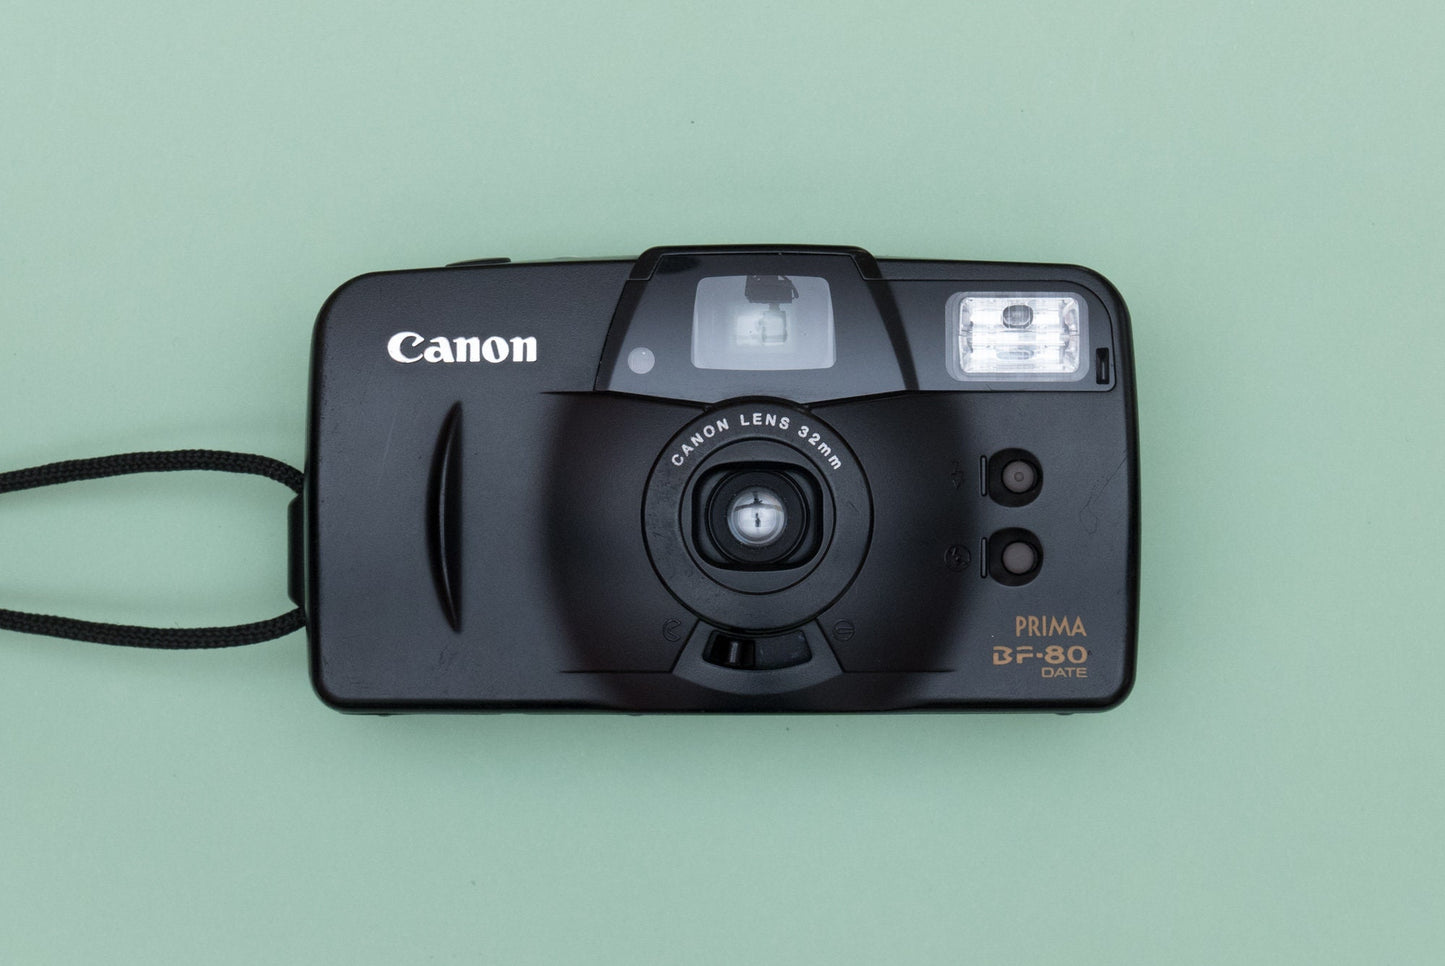 Canon Prima BF-80 Compact Point and Shoot 35mm Film Camera